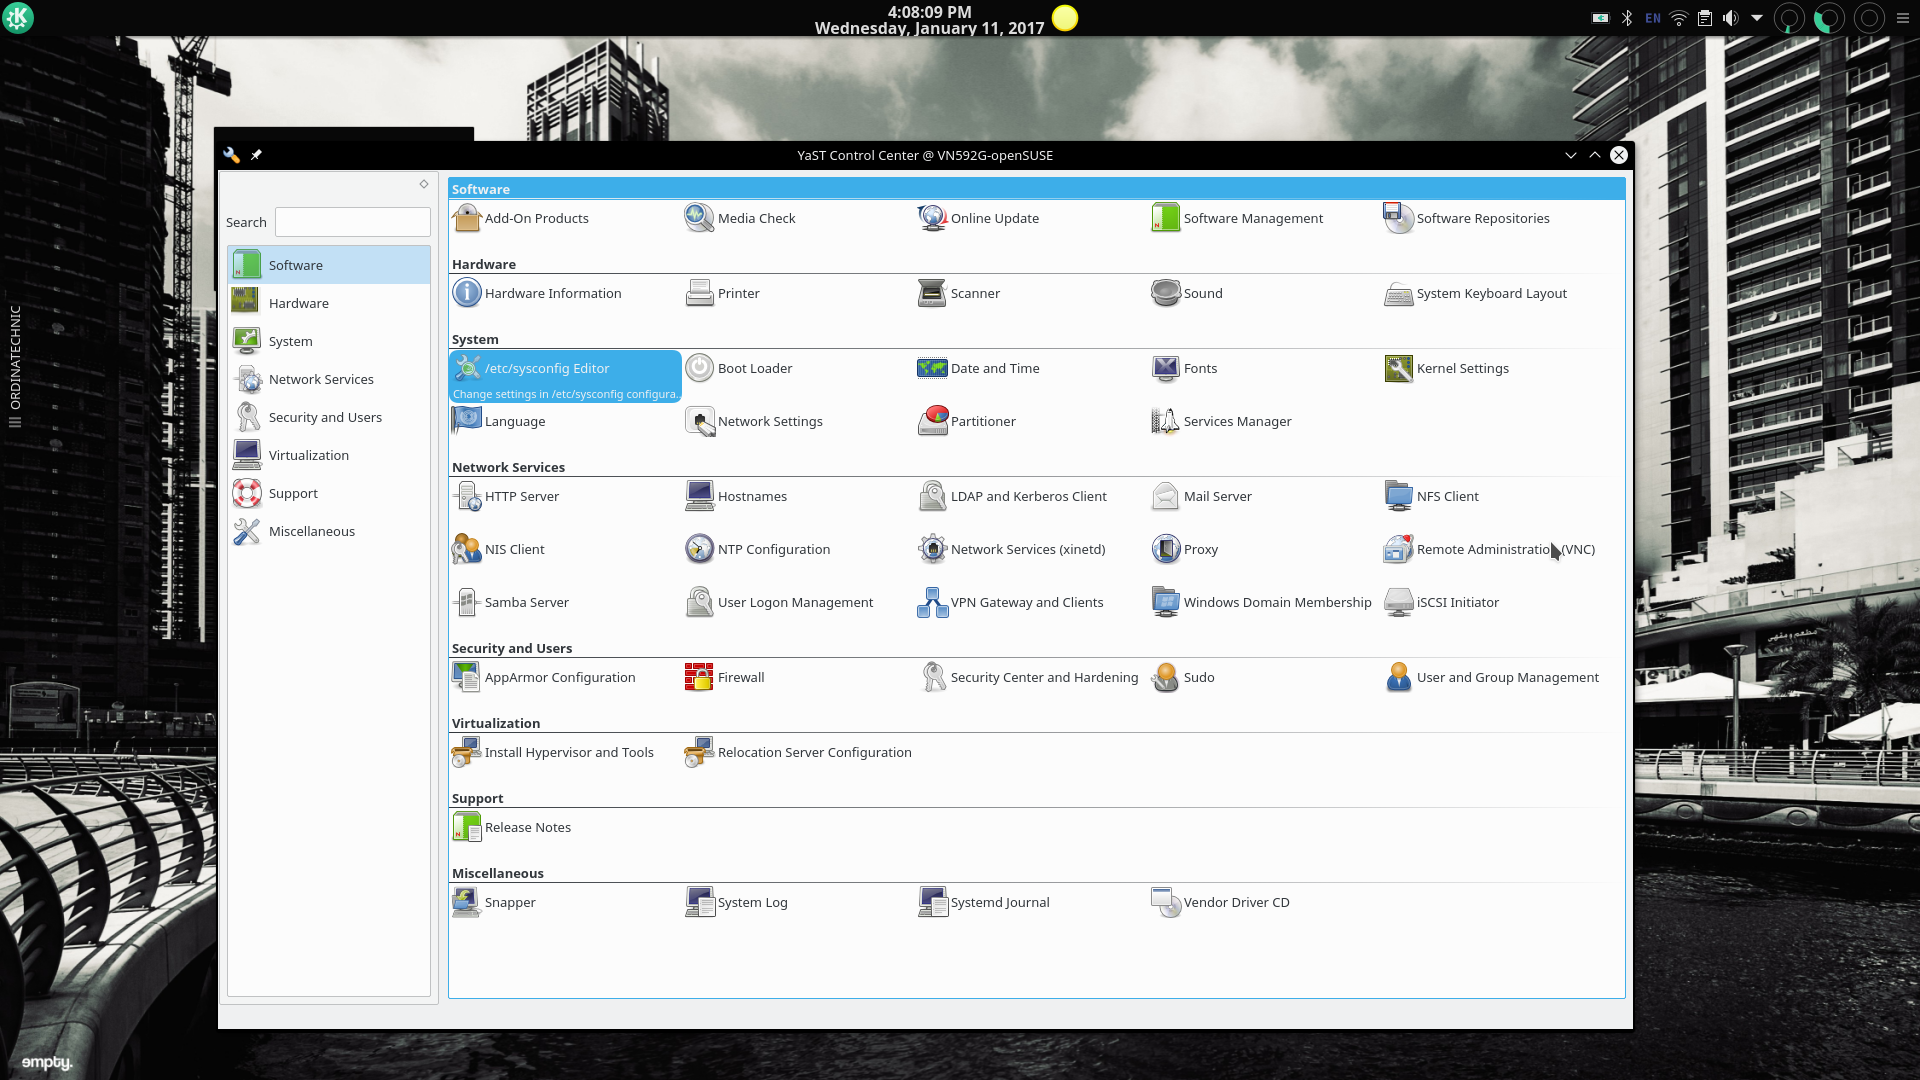 The Main Screen of the YaST GUI.The YaST suite of system administration programs is unique among Linux distributions. It allows users to configure every aspect of the openSUSE system.